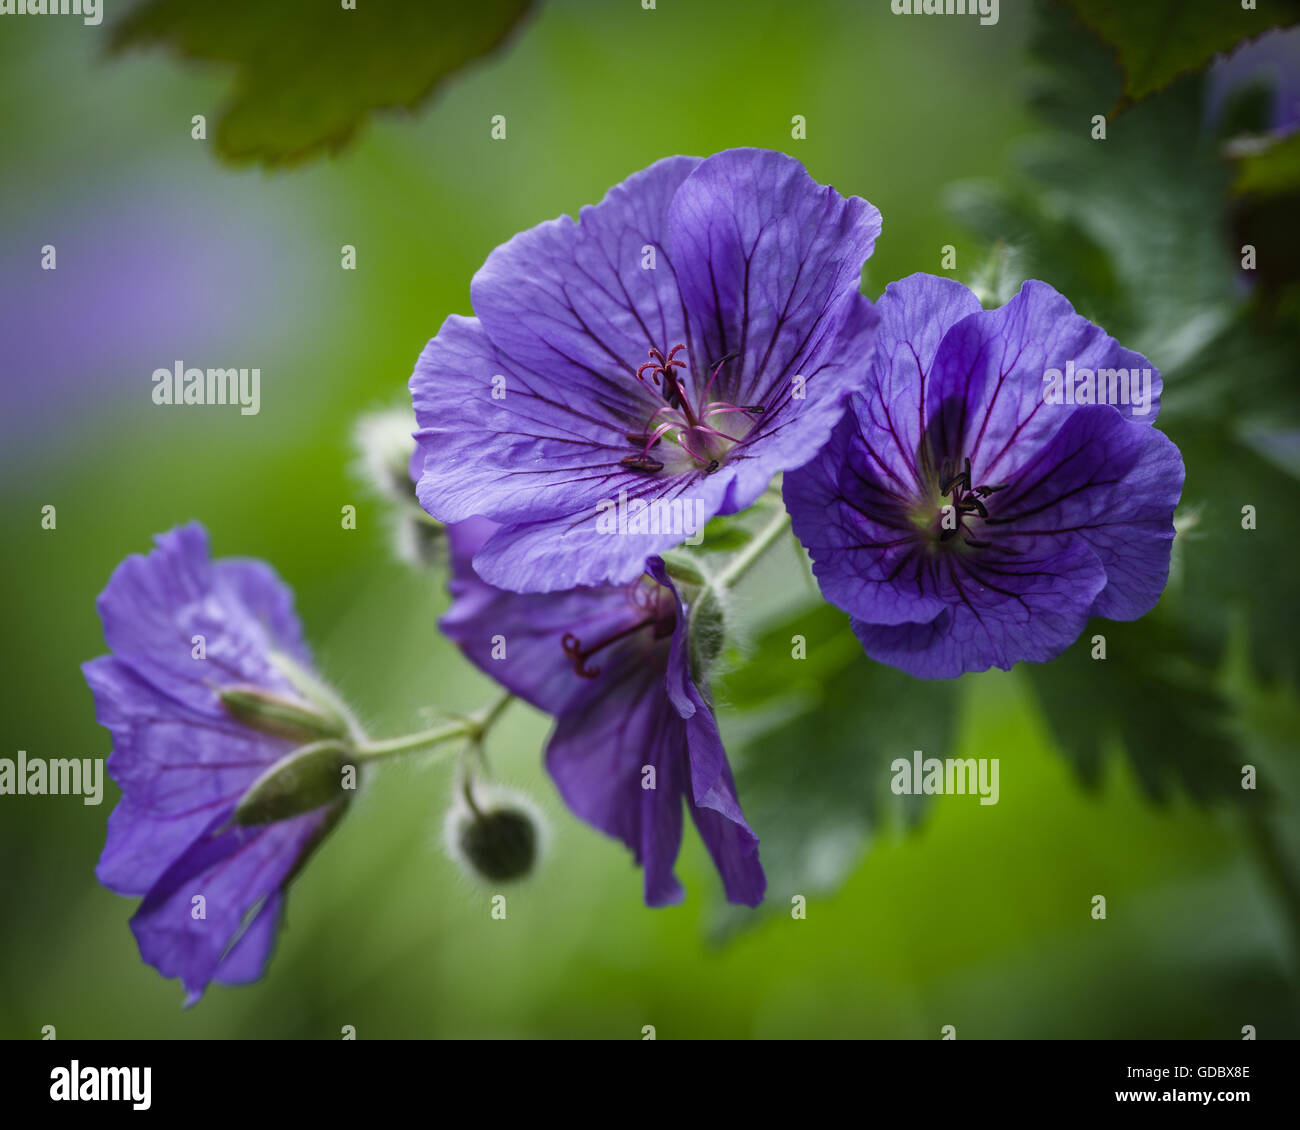 Geranium is a genus of 422 species of flowering annual, biennial, and perennial plants that are commonly known as the cranesbill Stock Photo